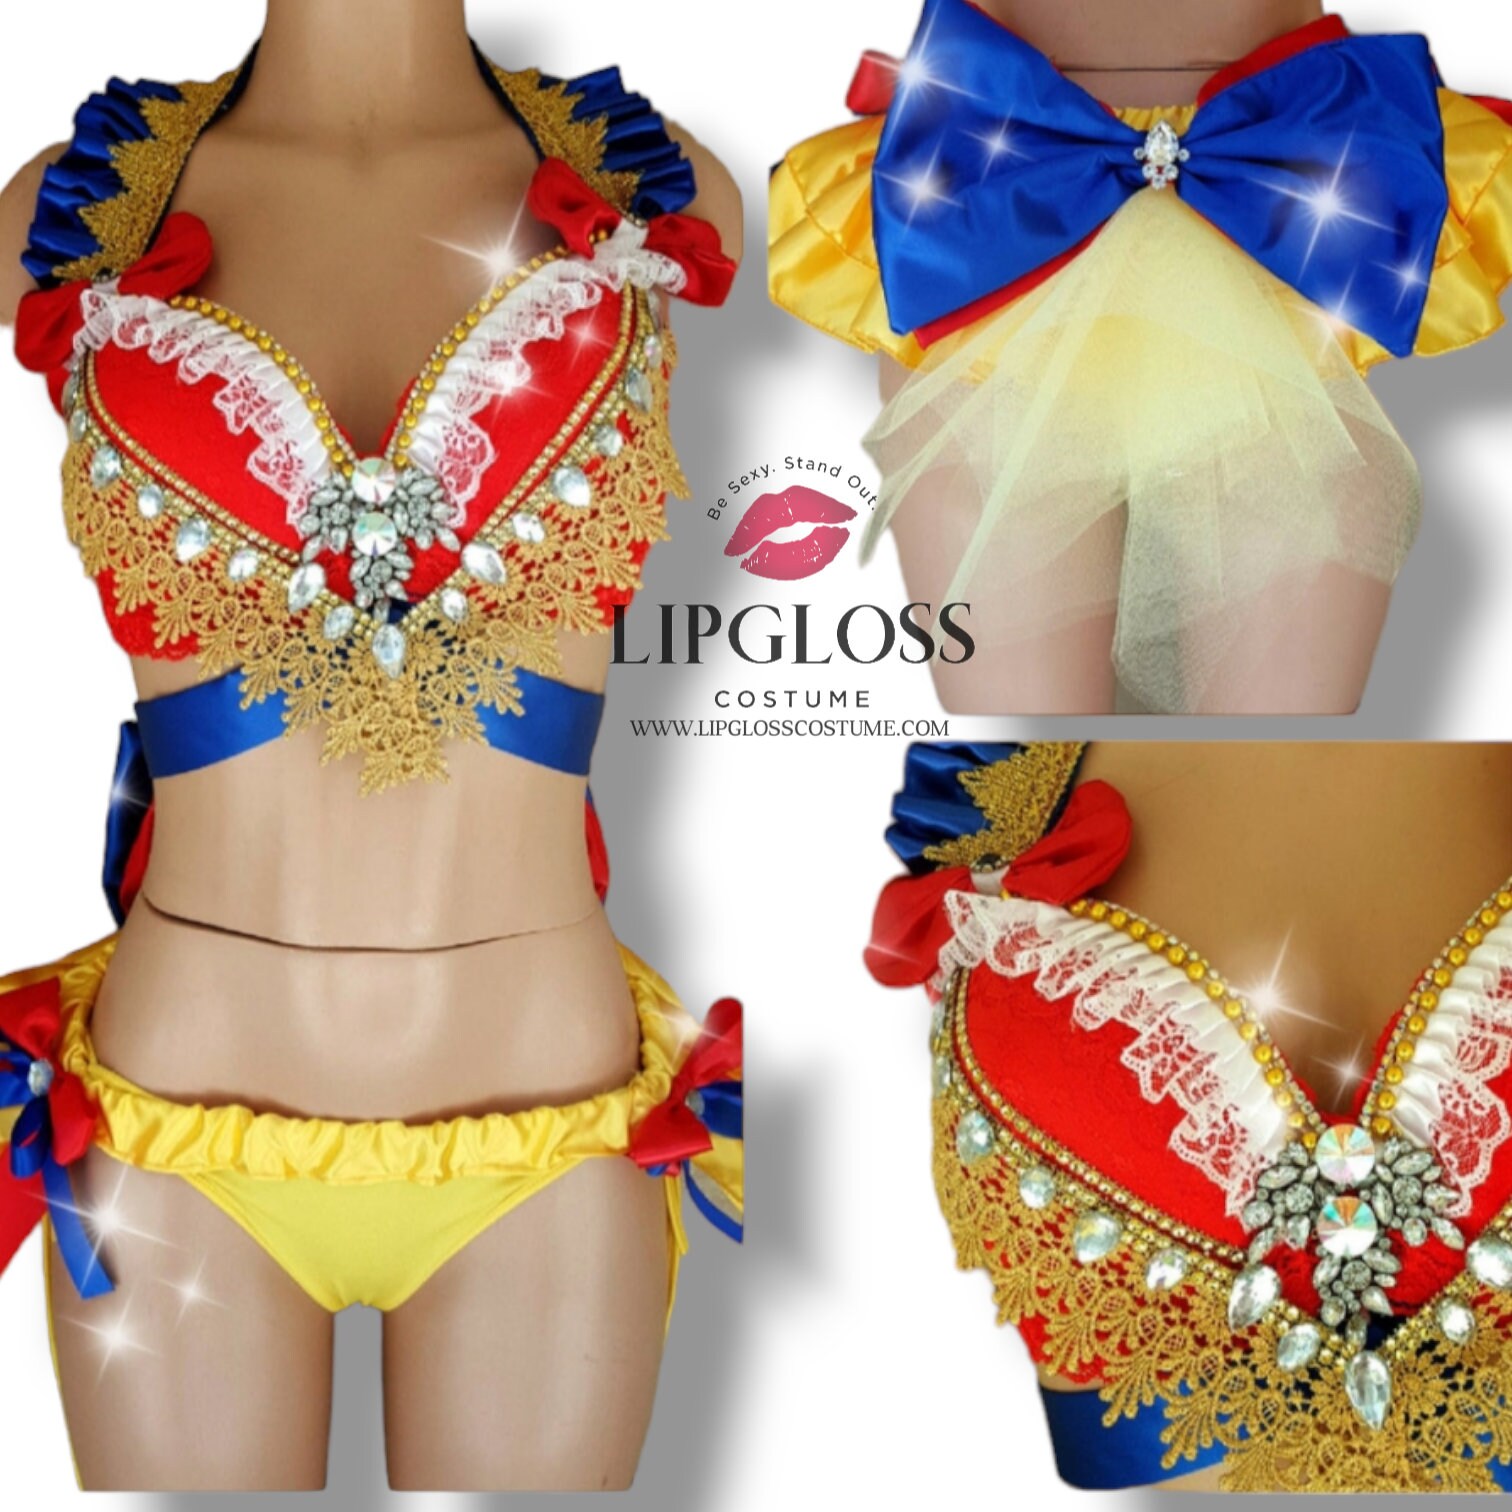 Snow White Rave Costume Rave Outfit Festival Clothes